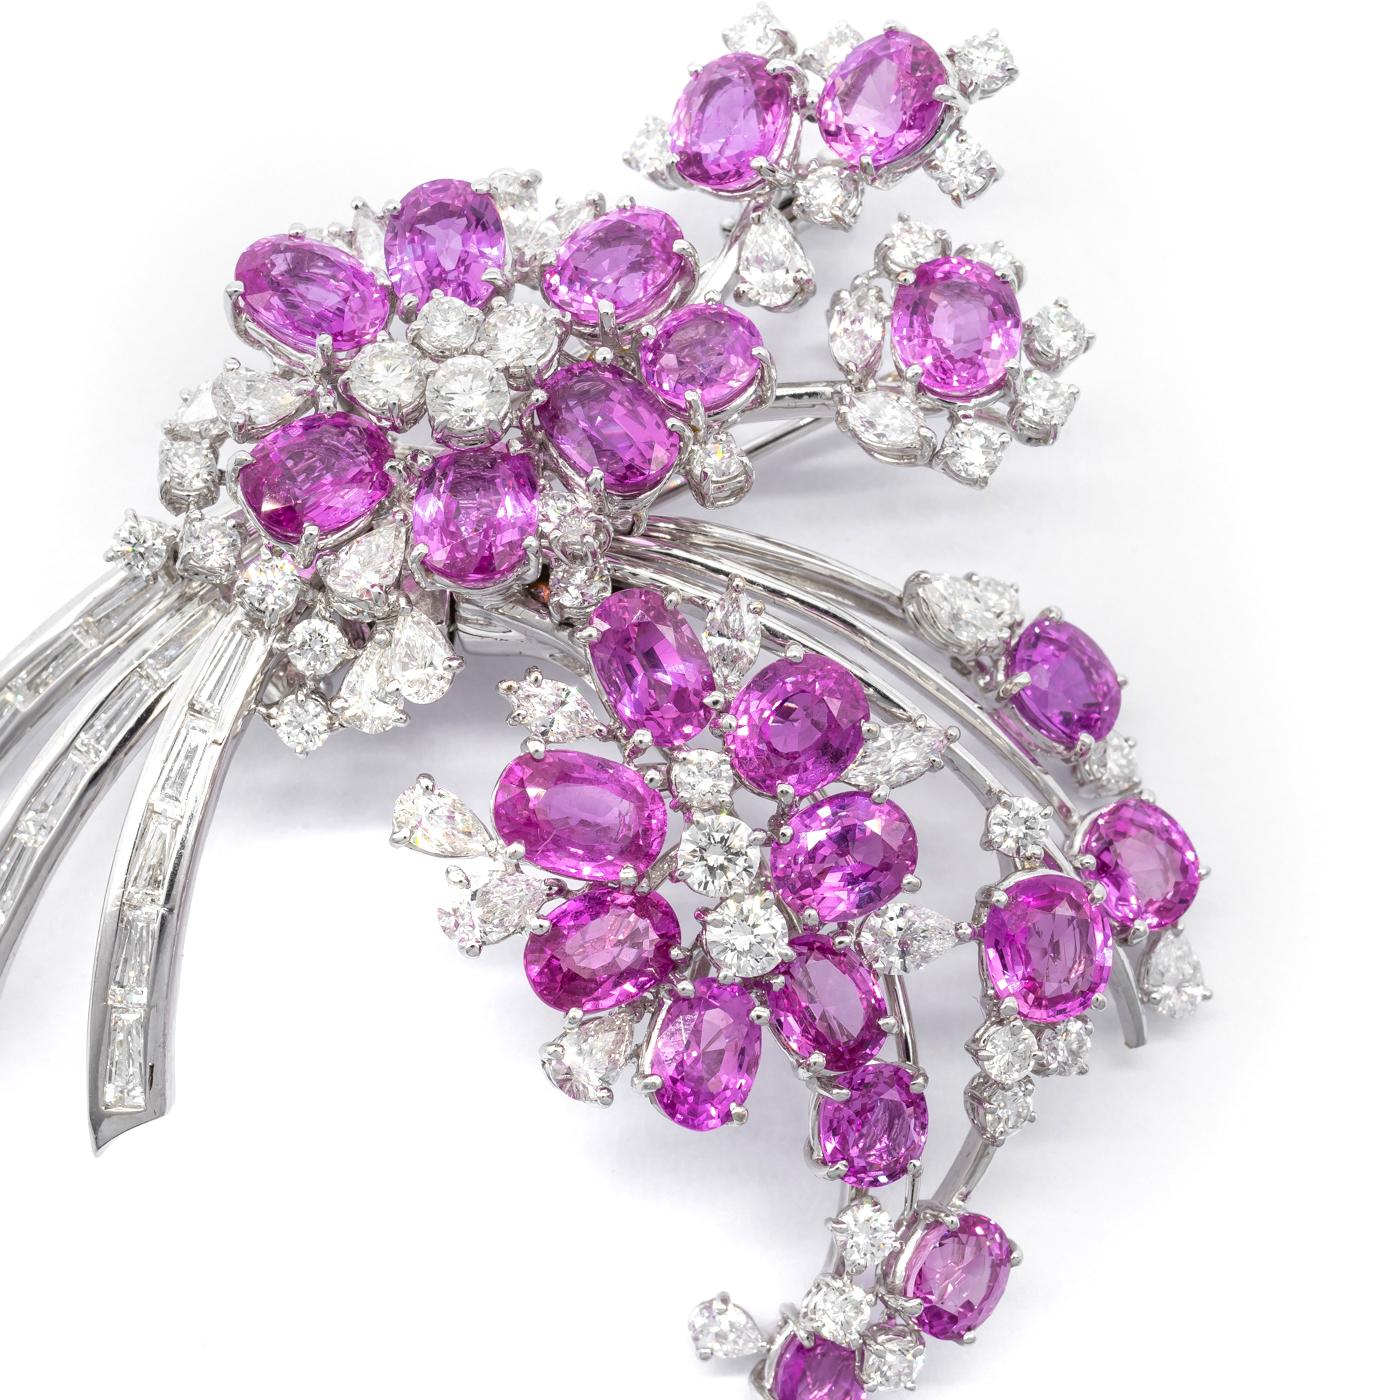 A vintage pink sapphire and diamond spray brooch, set with pink sapphires, forming a bouquet of flowers, set with baguette-cut and round brilliant-cut, marquise-cut and pear-cut diamonds, in 18ct white gold, circa 1955. Measures approximately 60 x